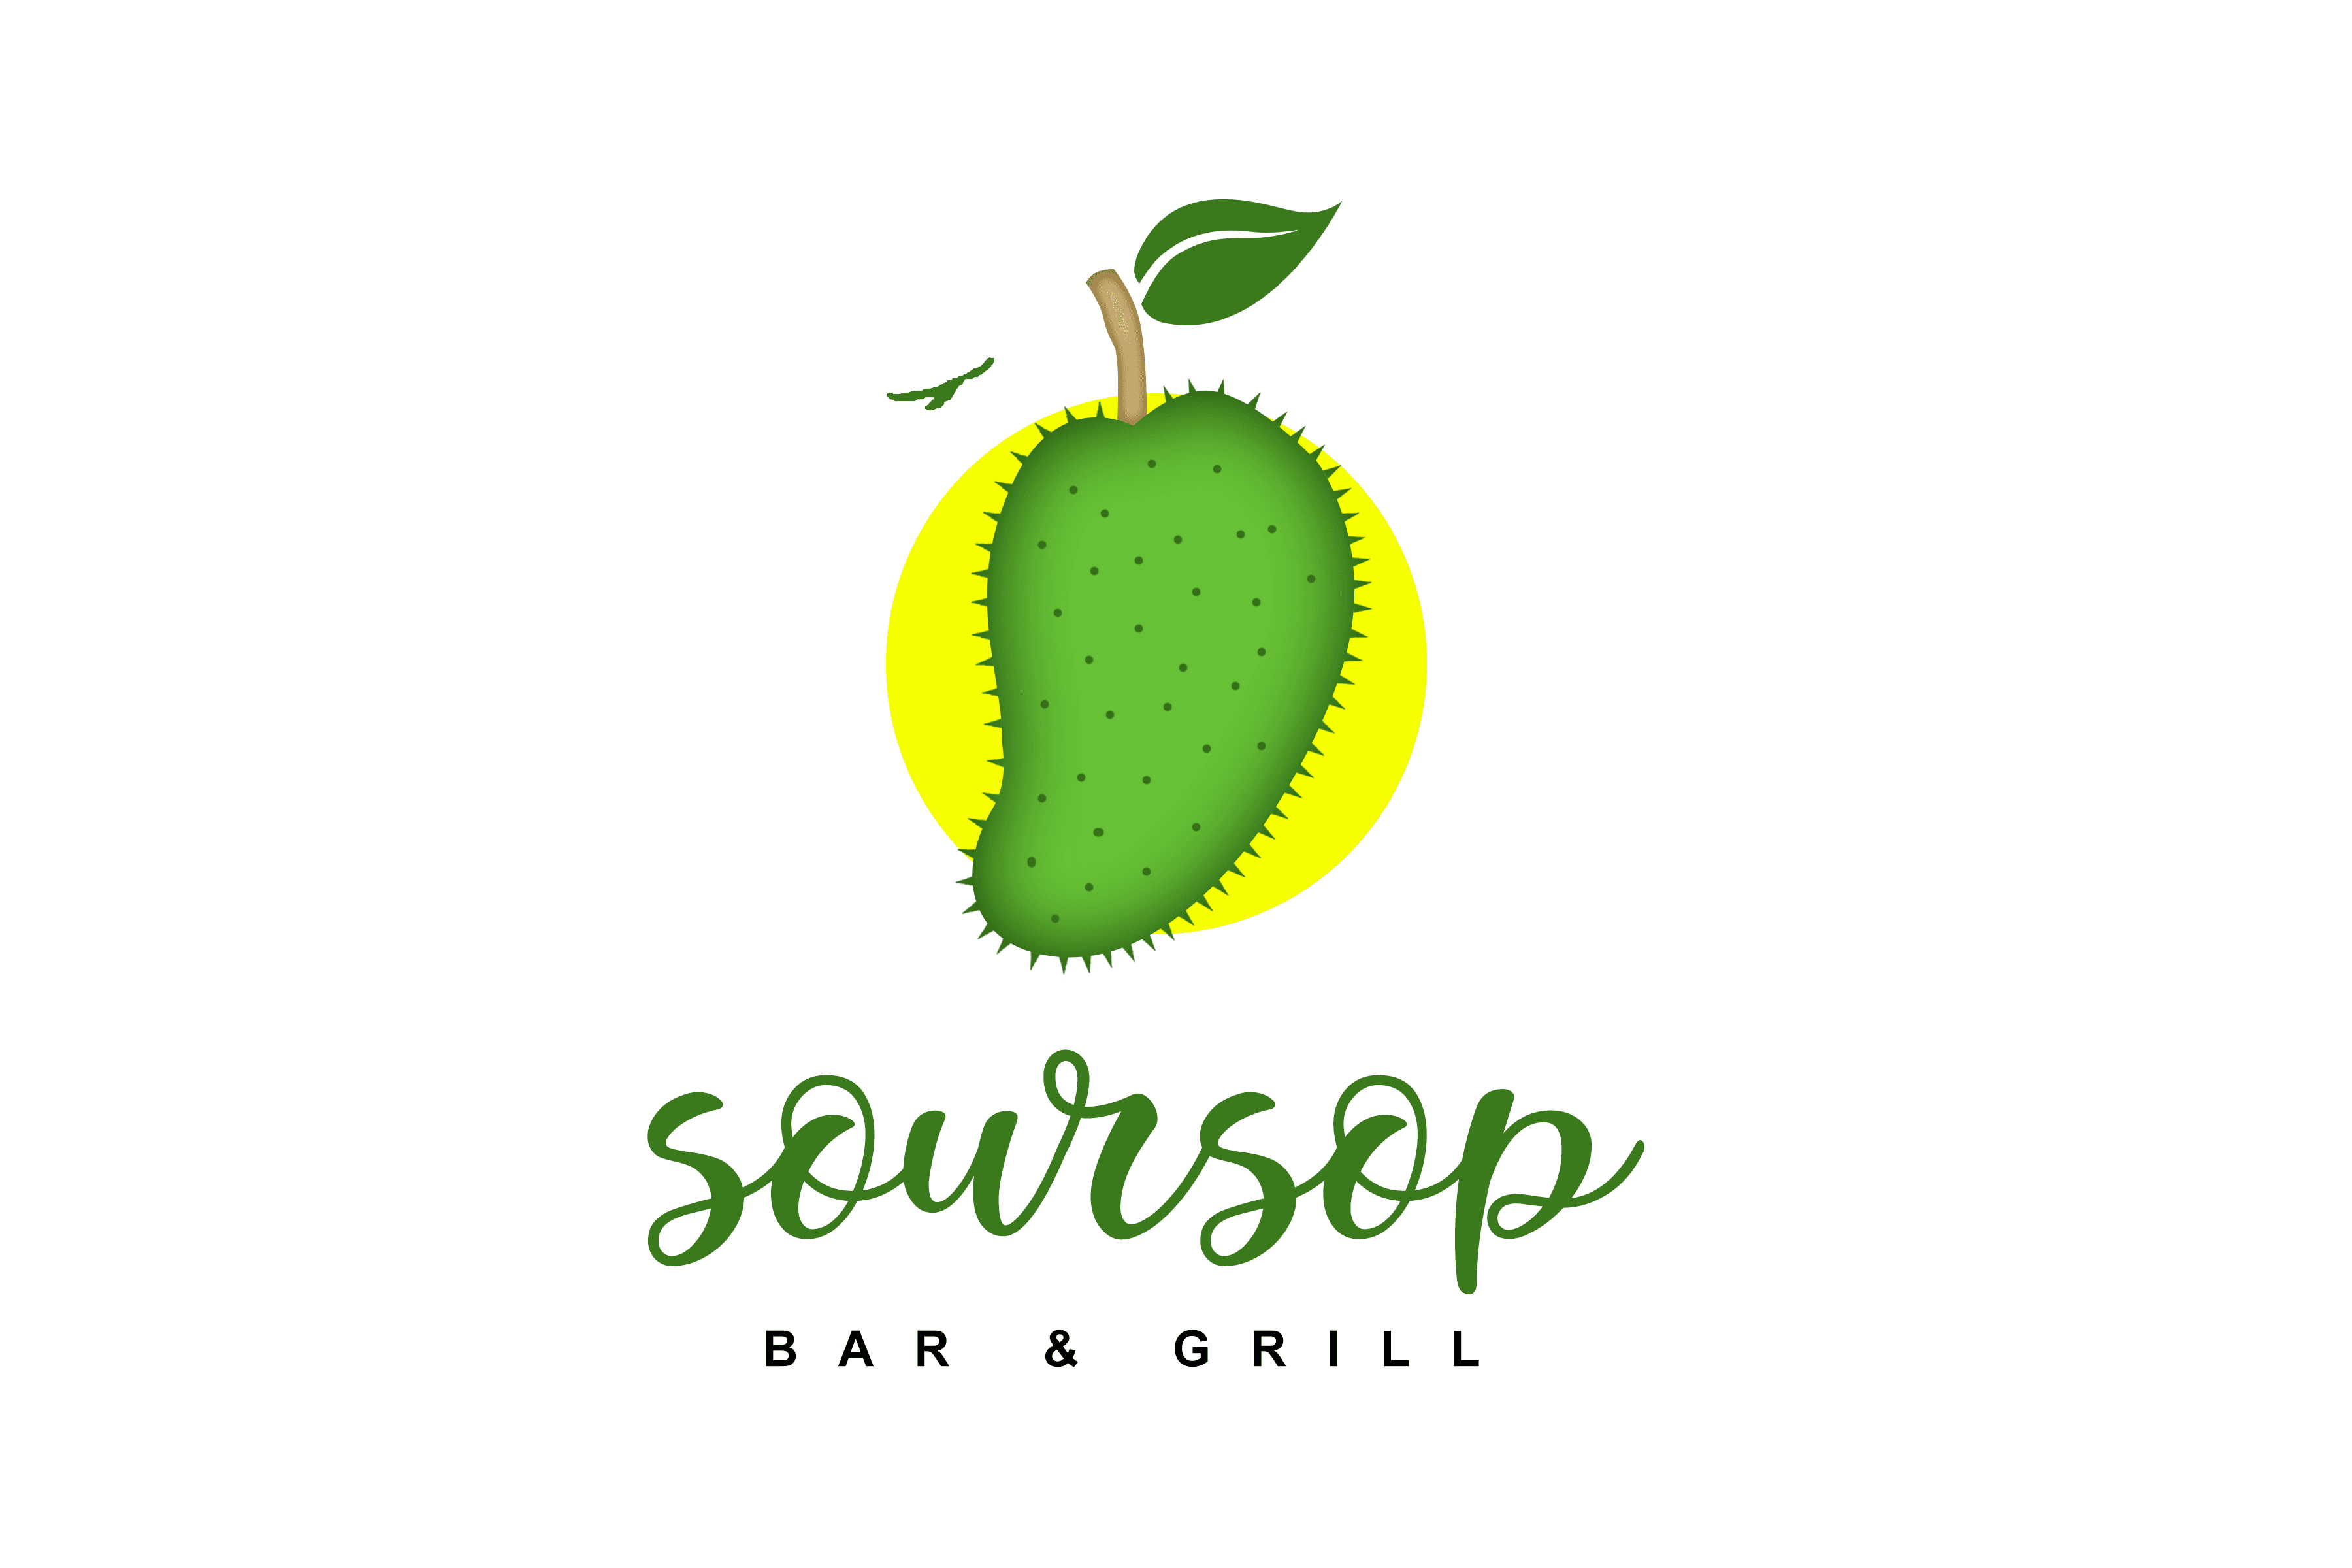 Soursop Bar and Grill